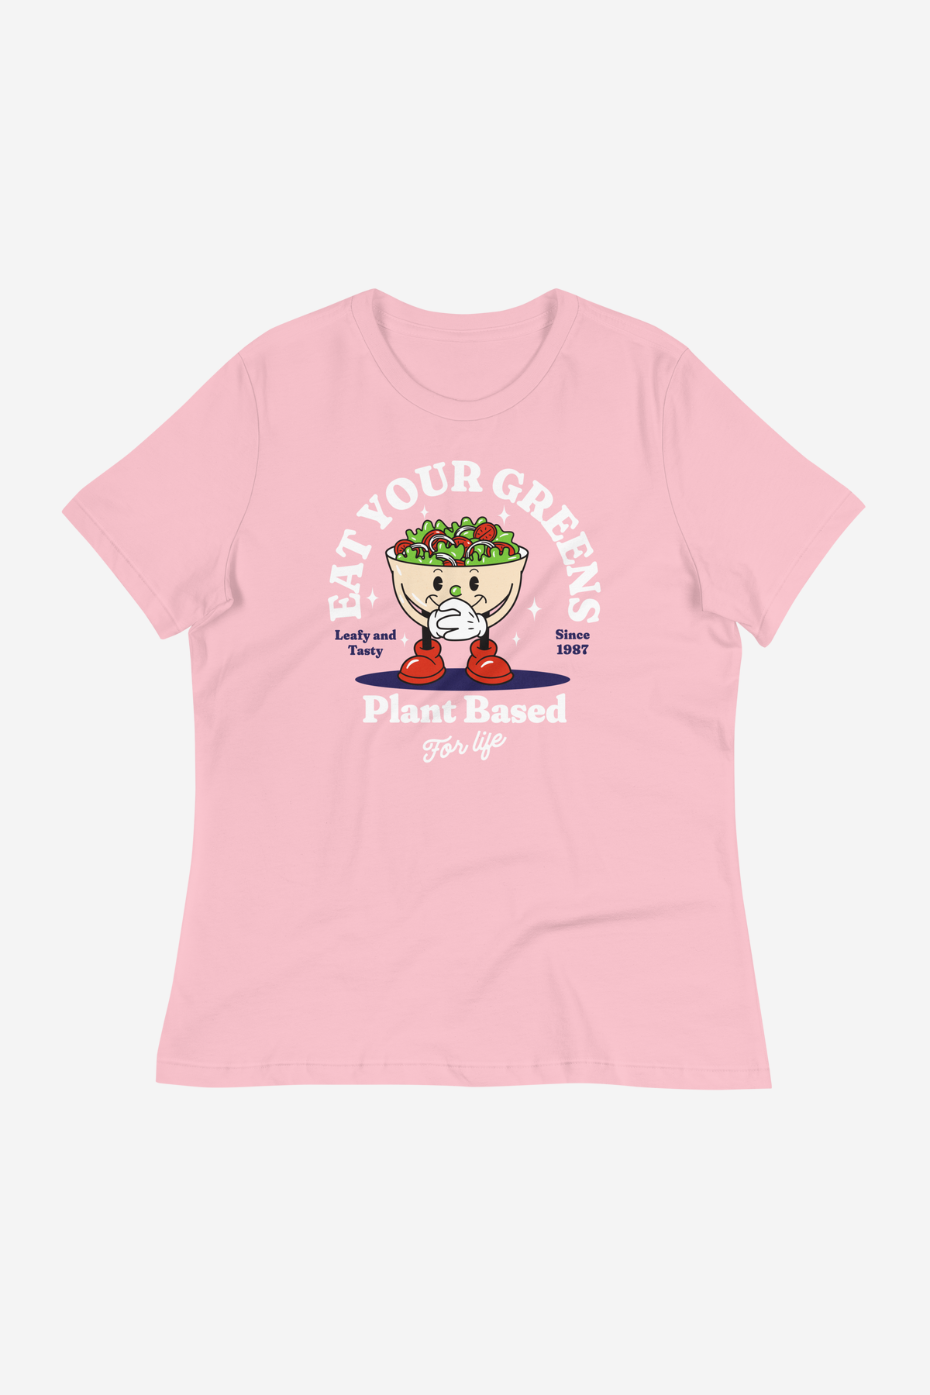 Eat Your Greens Women's Relaxed T-Shirt